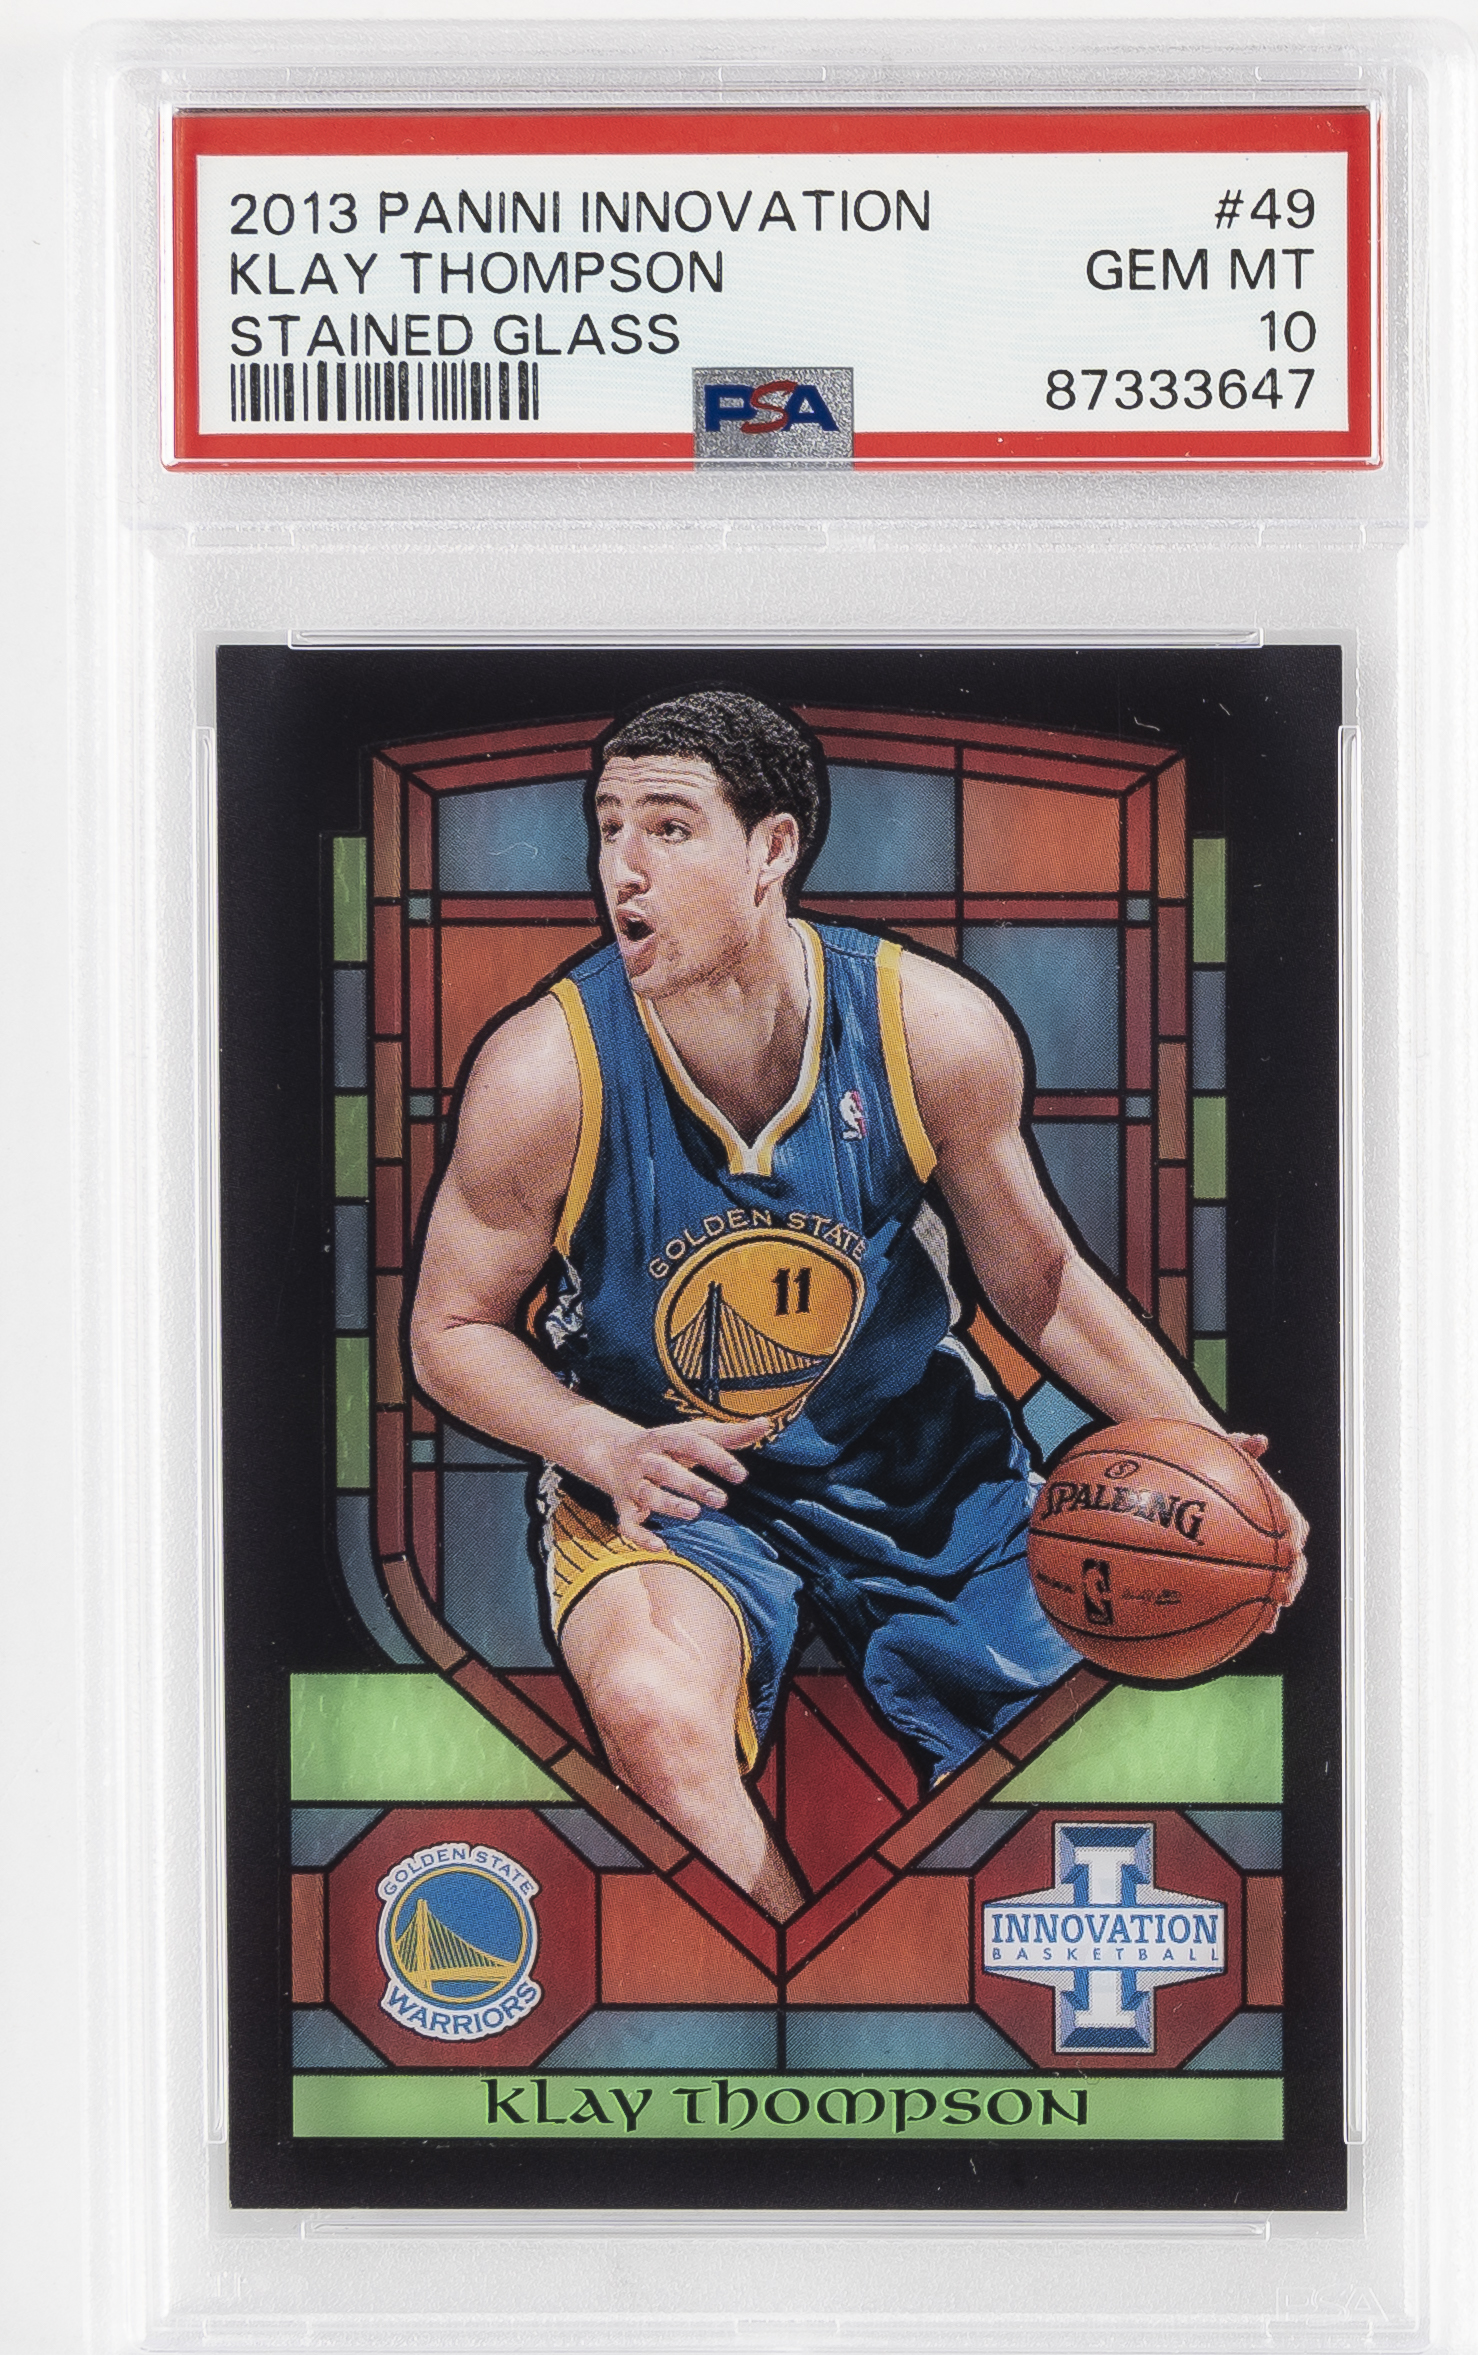 2013-14 Panini Innovation Stained Glass #49 Klay Thompson – PSA GEM MT 10